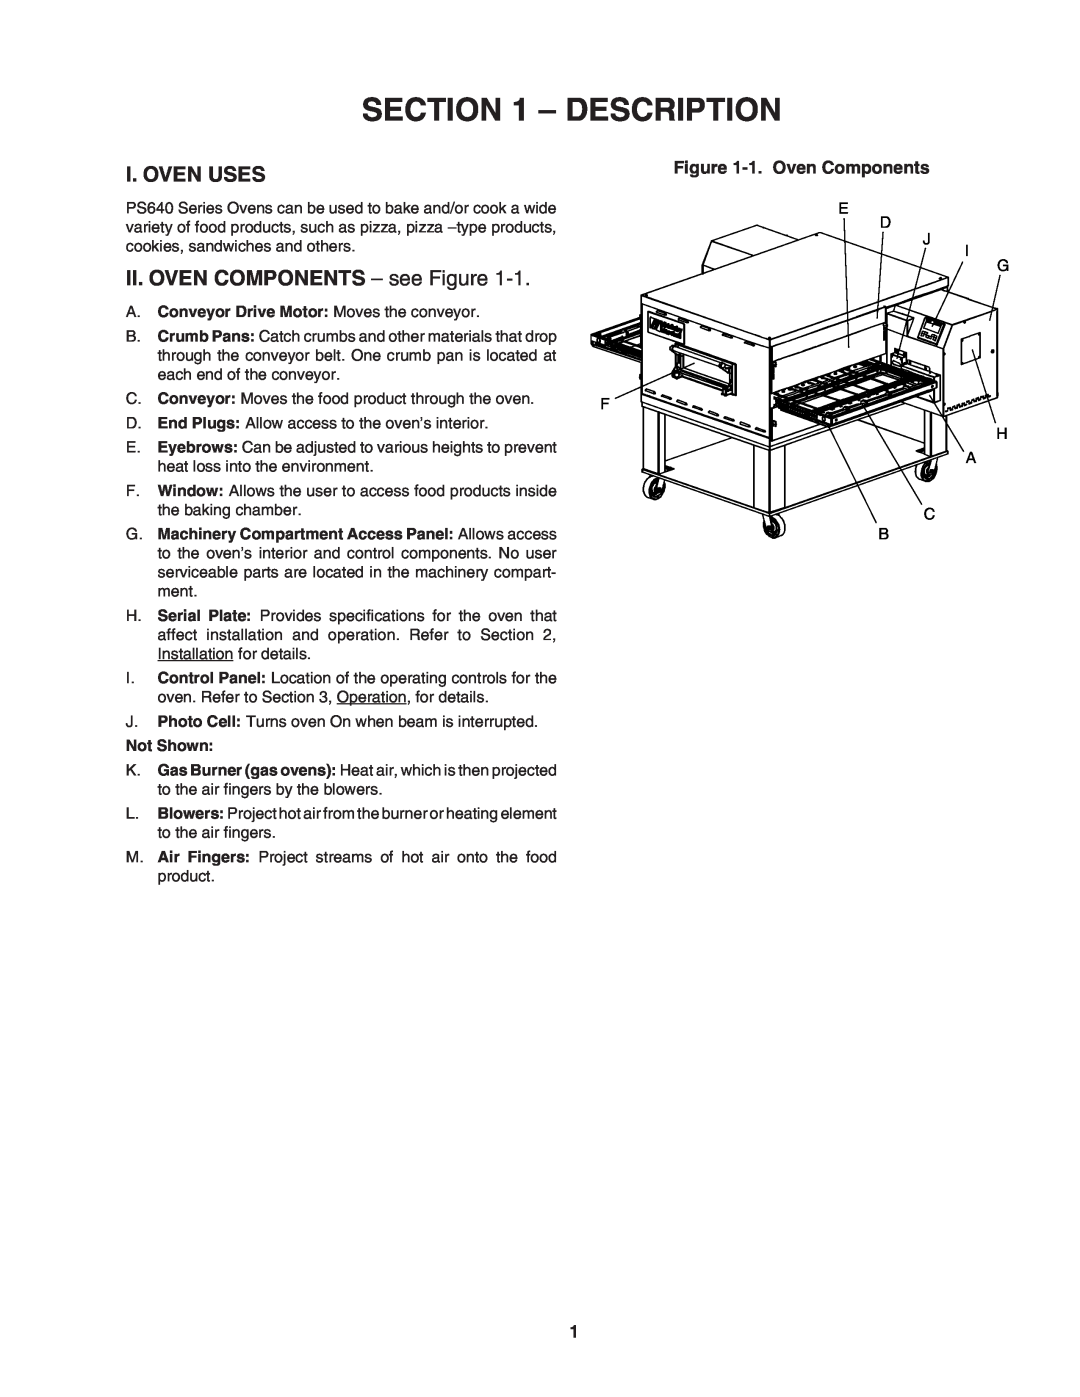 Middleby Marshall PS640 installation manual Description, I. Oven Uses, II. OVEN COMPONENTS - see Figure, 1. Oven Components 